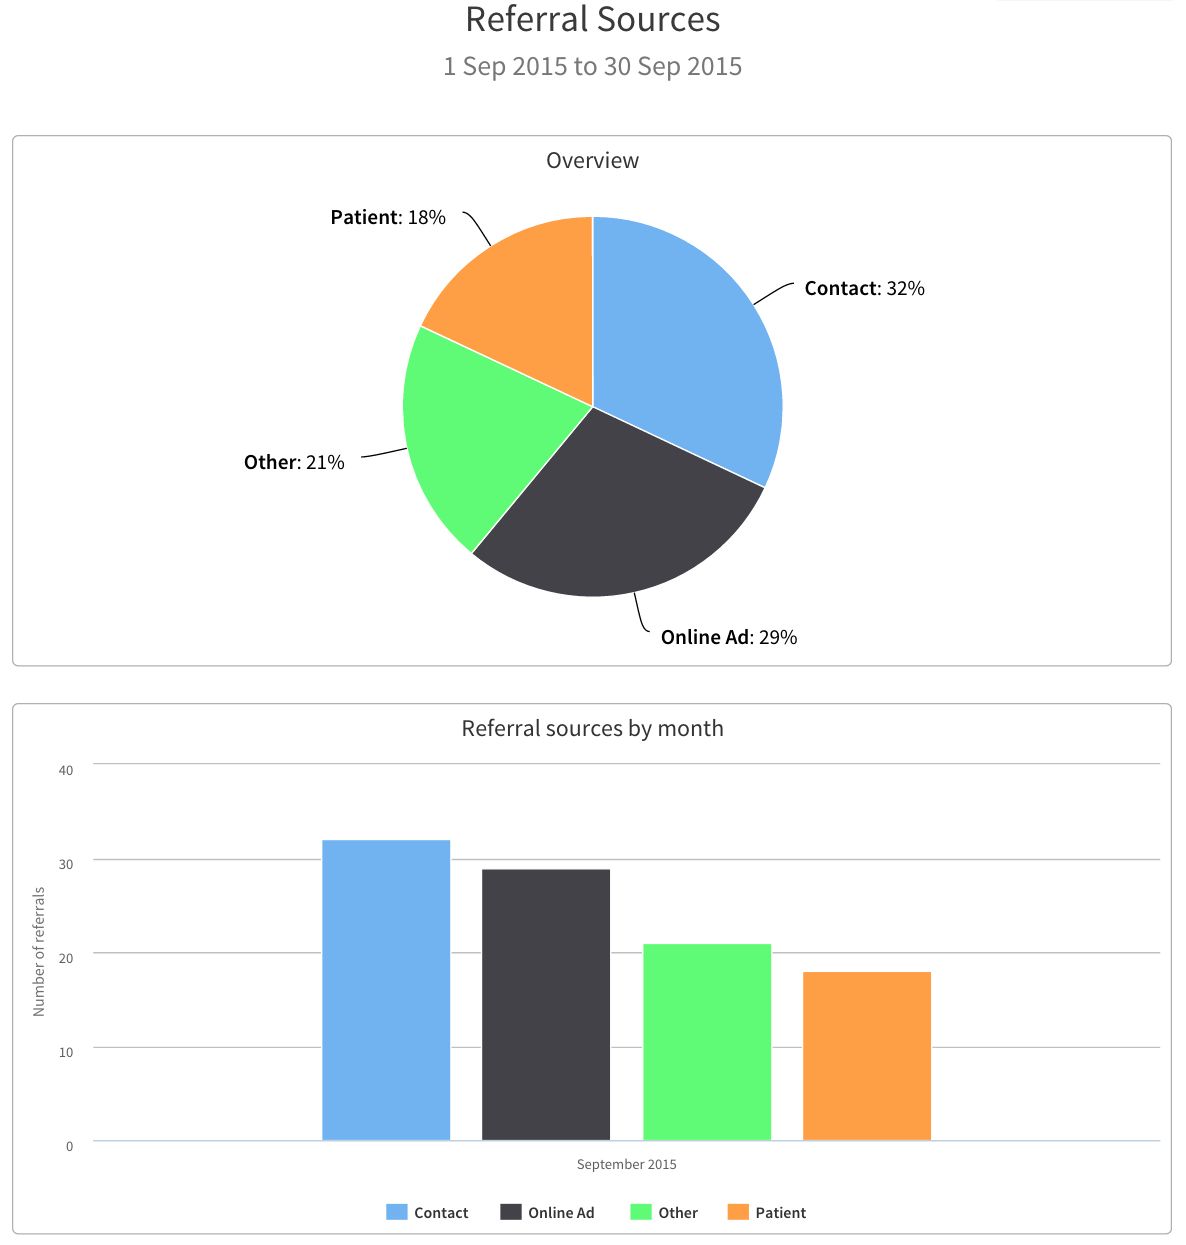 Charts in Cliniko reports showing referral source pie chart and "Referral sources by month" bar graph